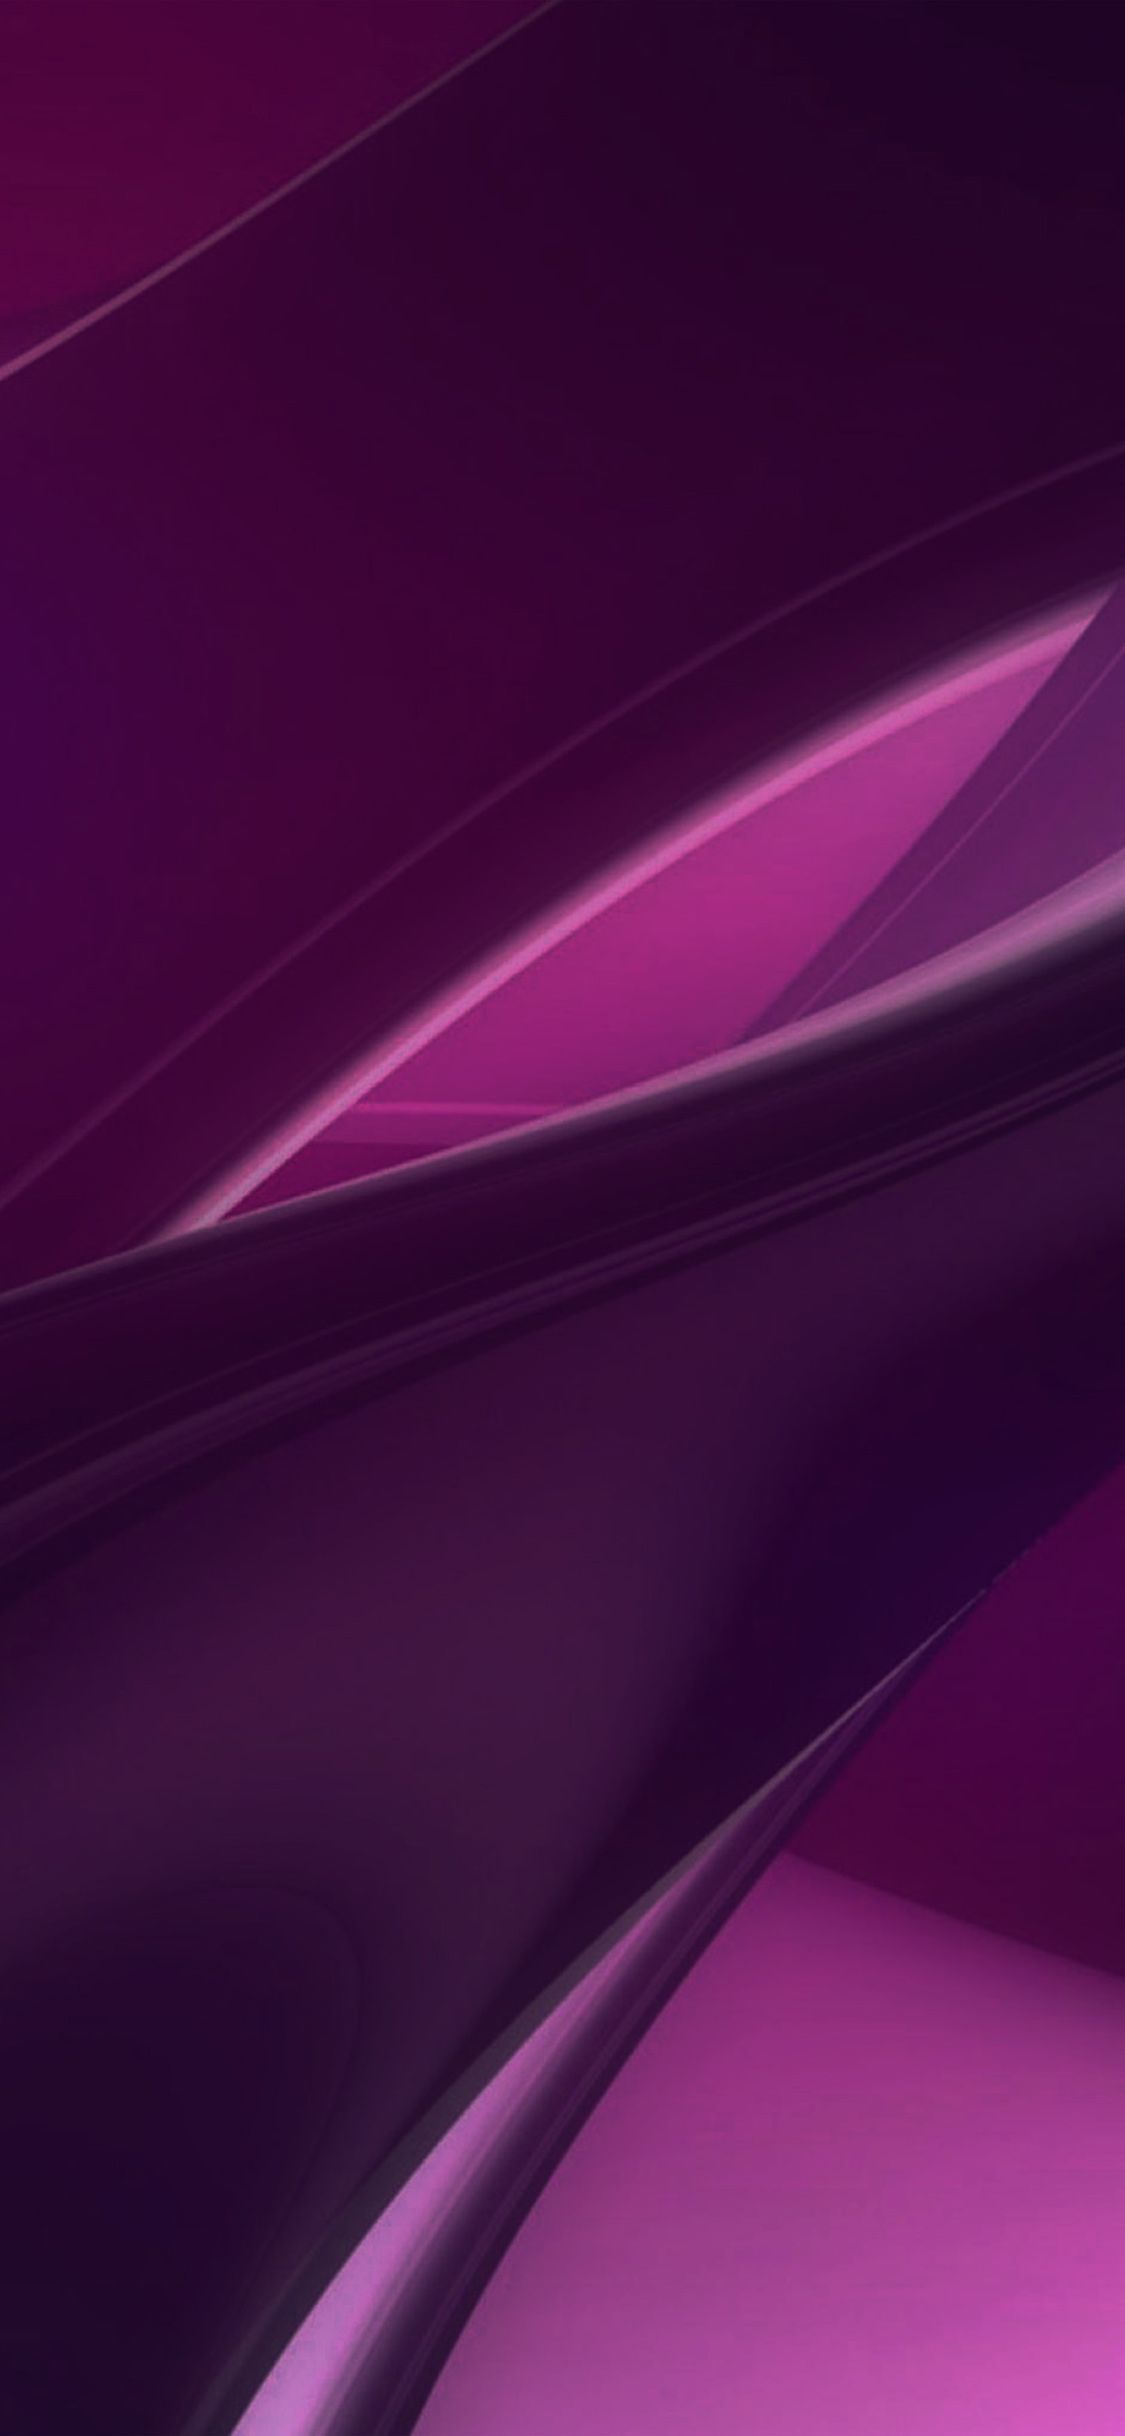 Purple Pink Abstract Curve Wallpaper iPhone Wallpaper